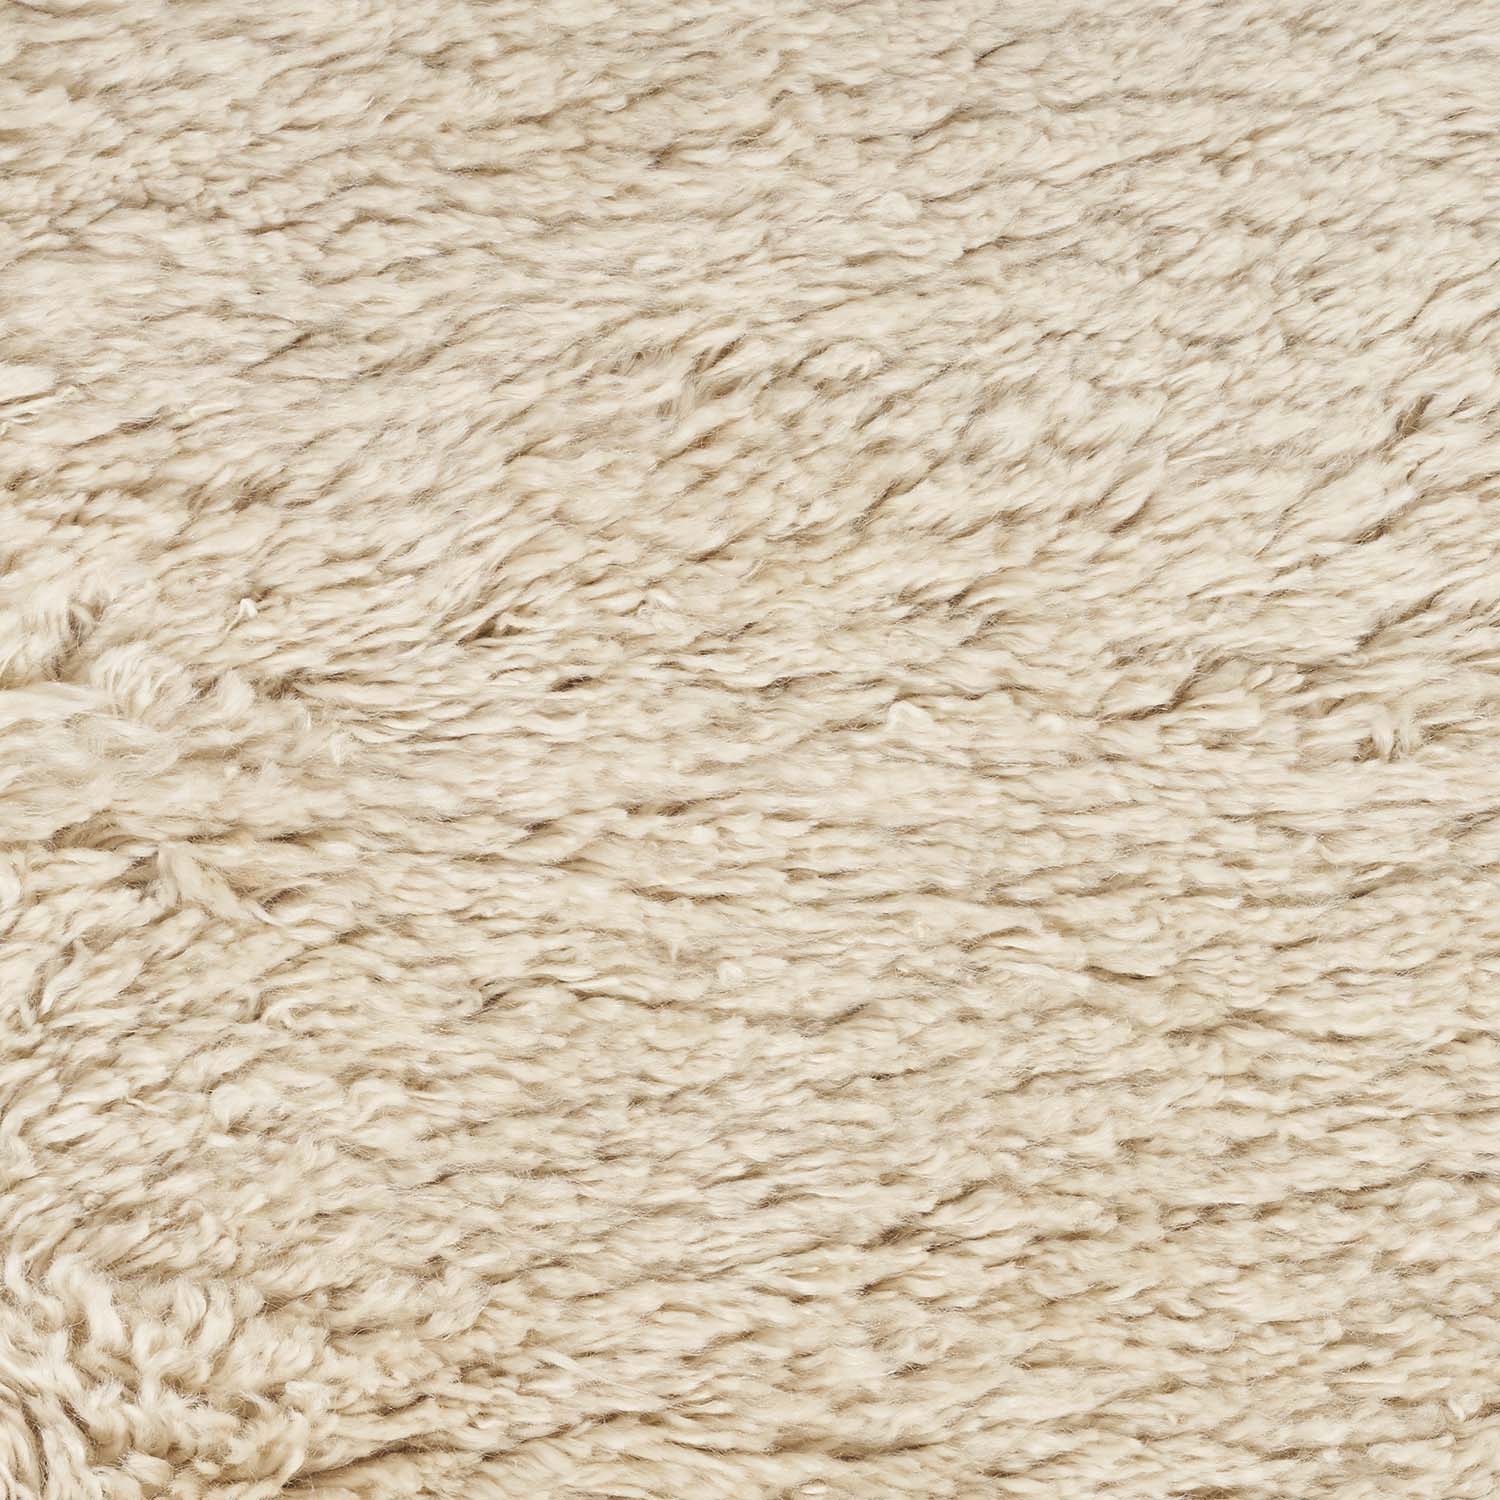 Close-up of fluffy, fibrous material resembling sheepskin or faux fur.